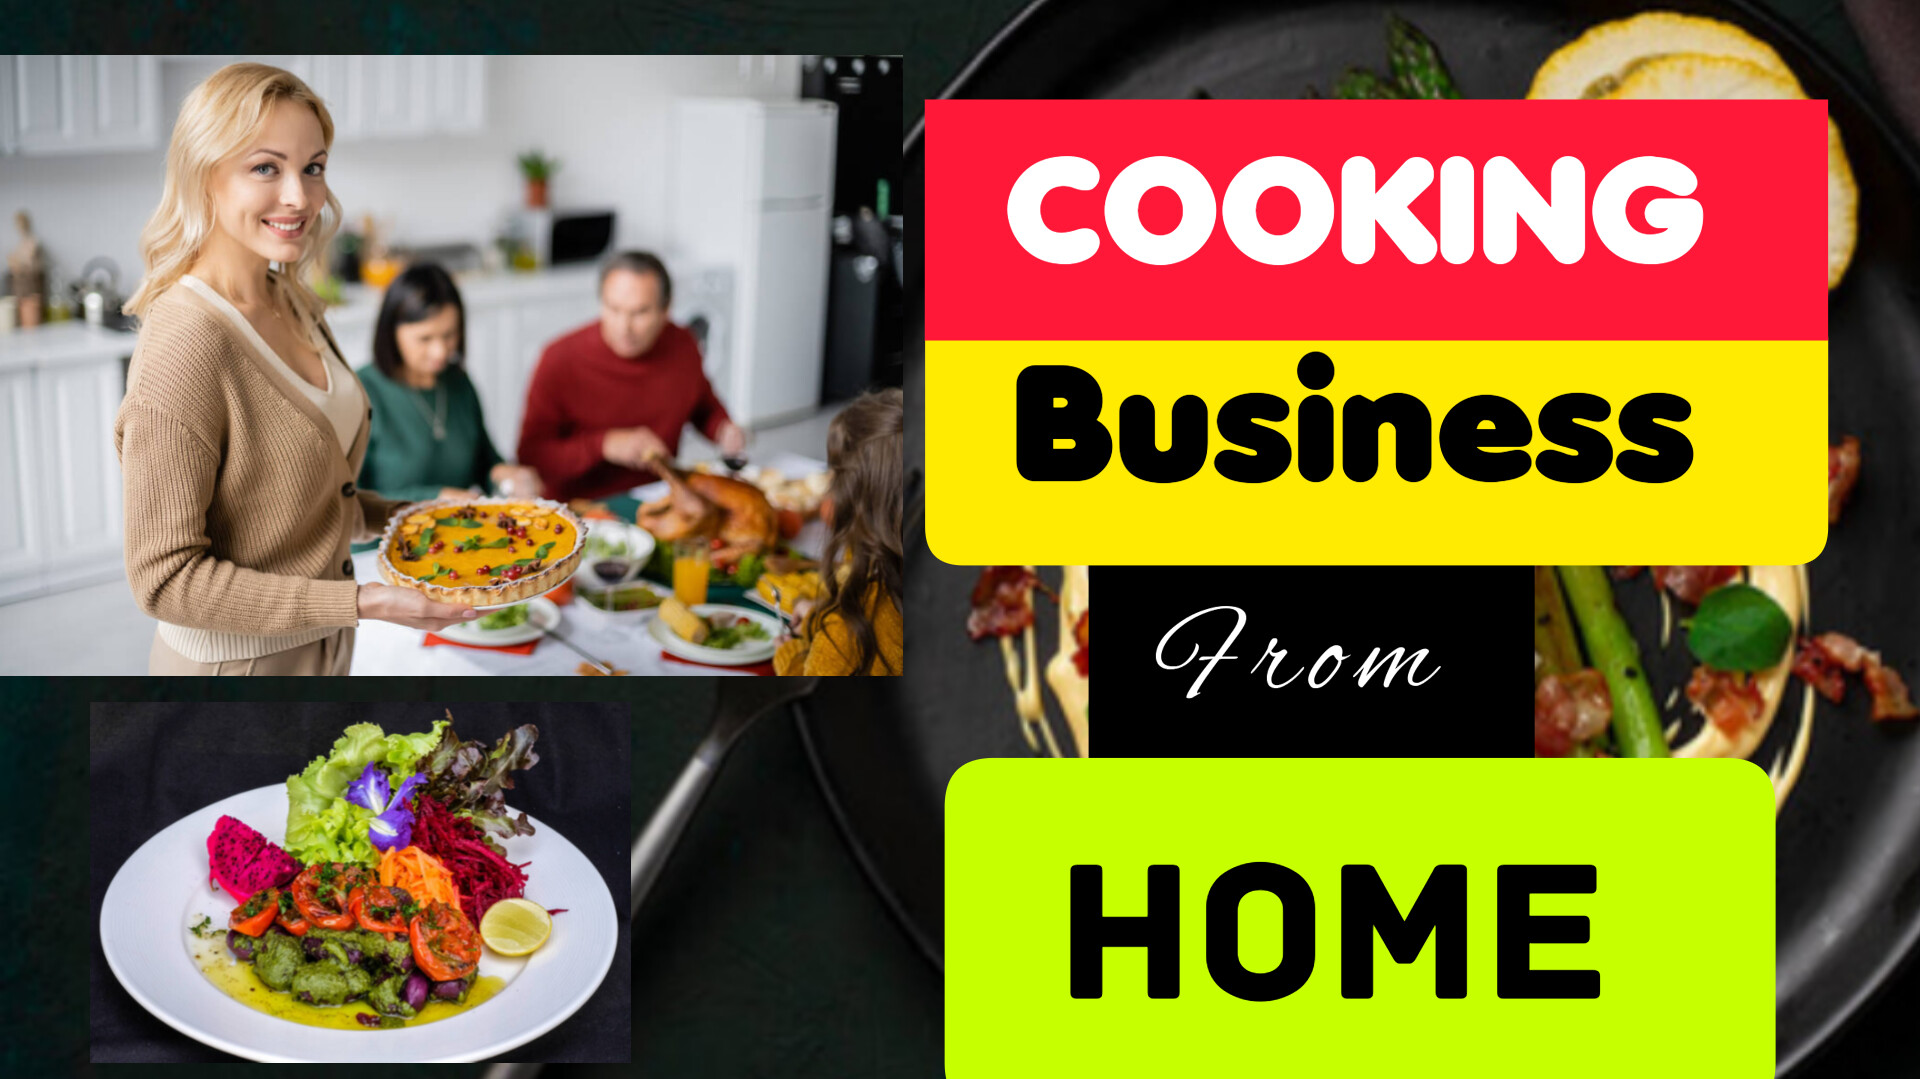 Cooking Business From Home | Cook And Sell Food From Home